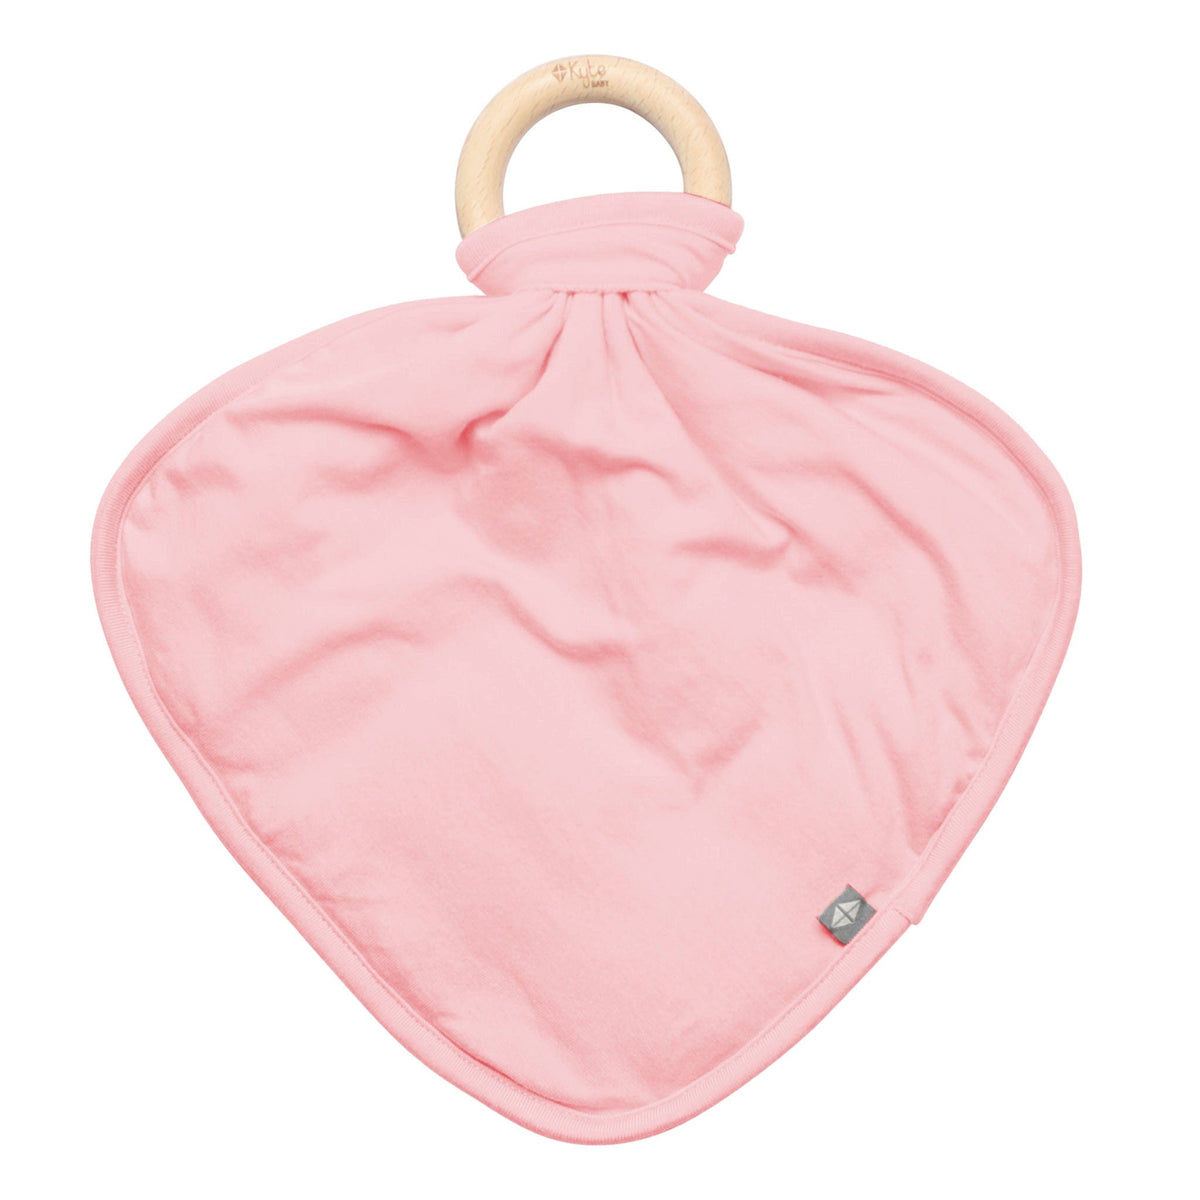 Kyte BABY Lovey Crepe / Infant Lovey in Crepe with Removable Teething Ring